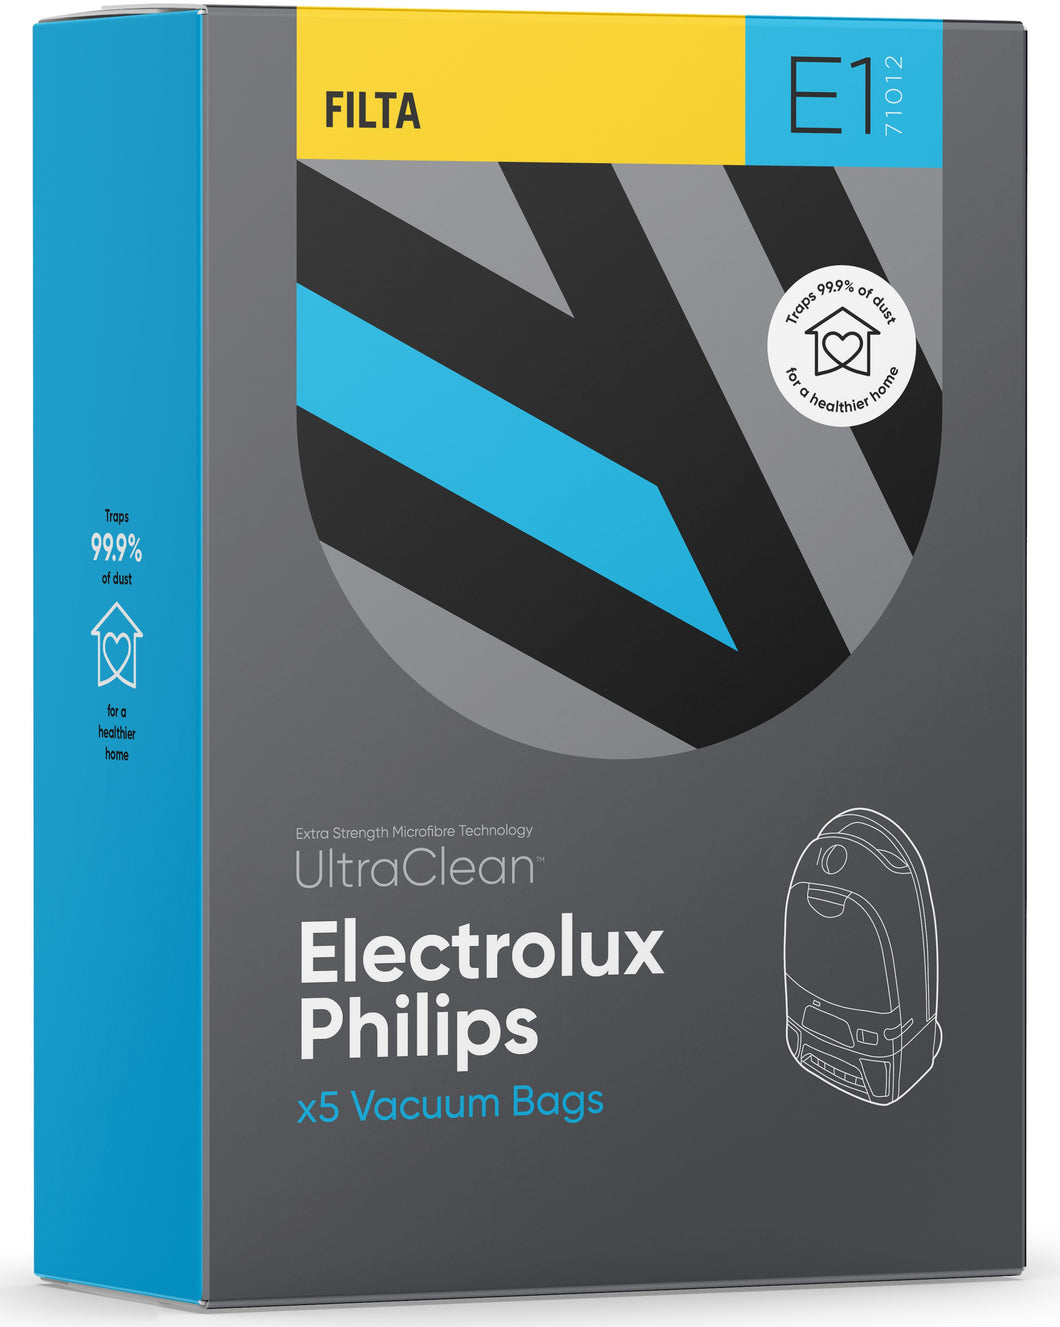 E1 - ULTRACLEAN ELECTROLUX, PHILIPS SMS MULTI LAYERED VACUUM BAGS 5 PACK